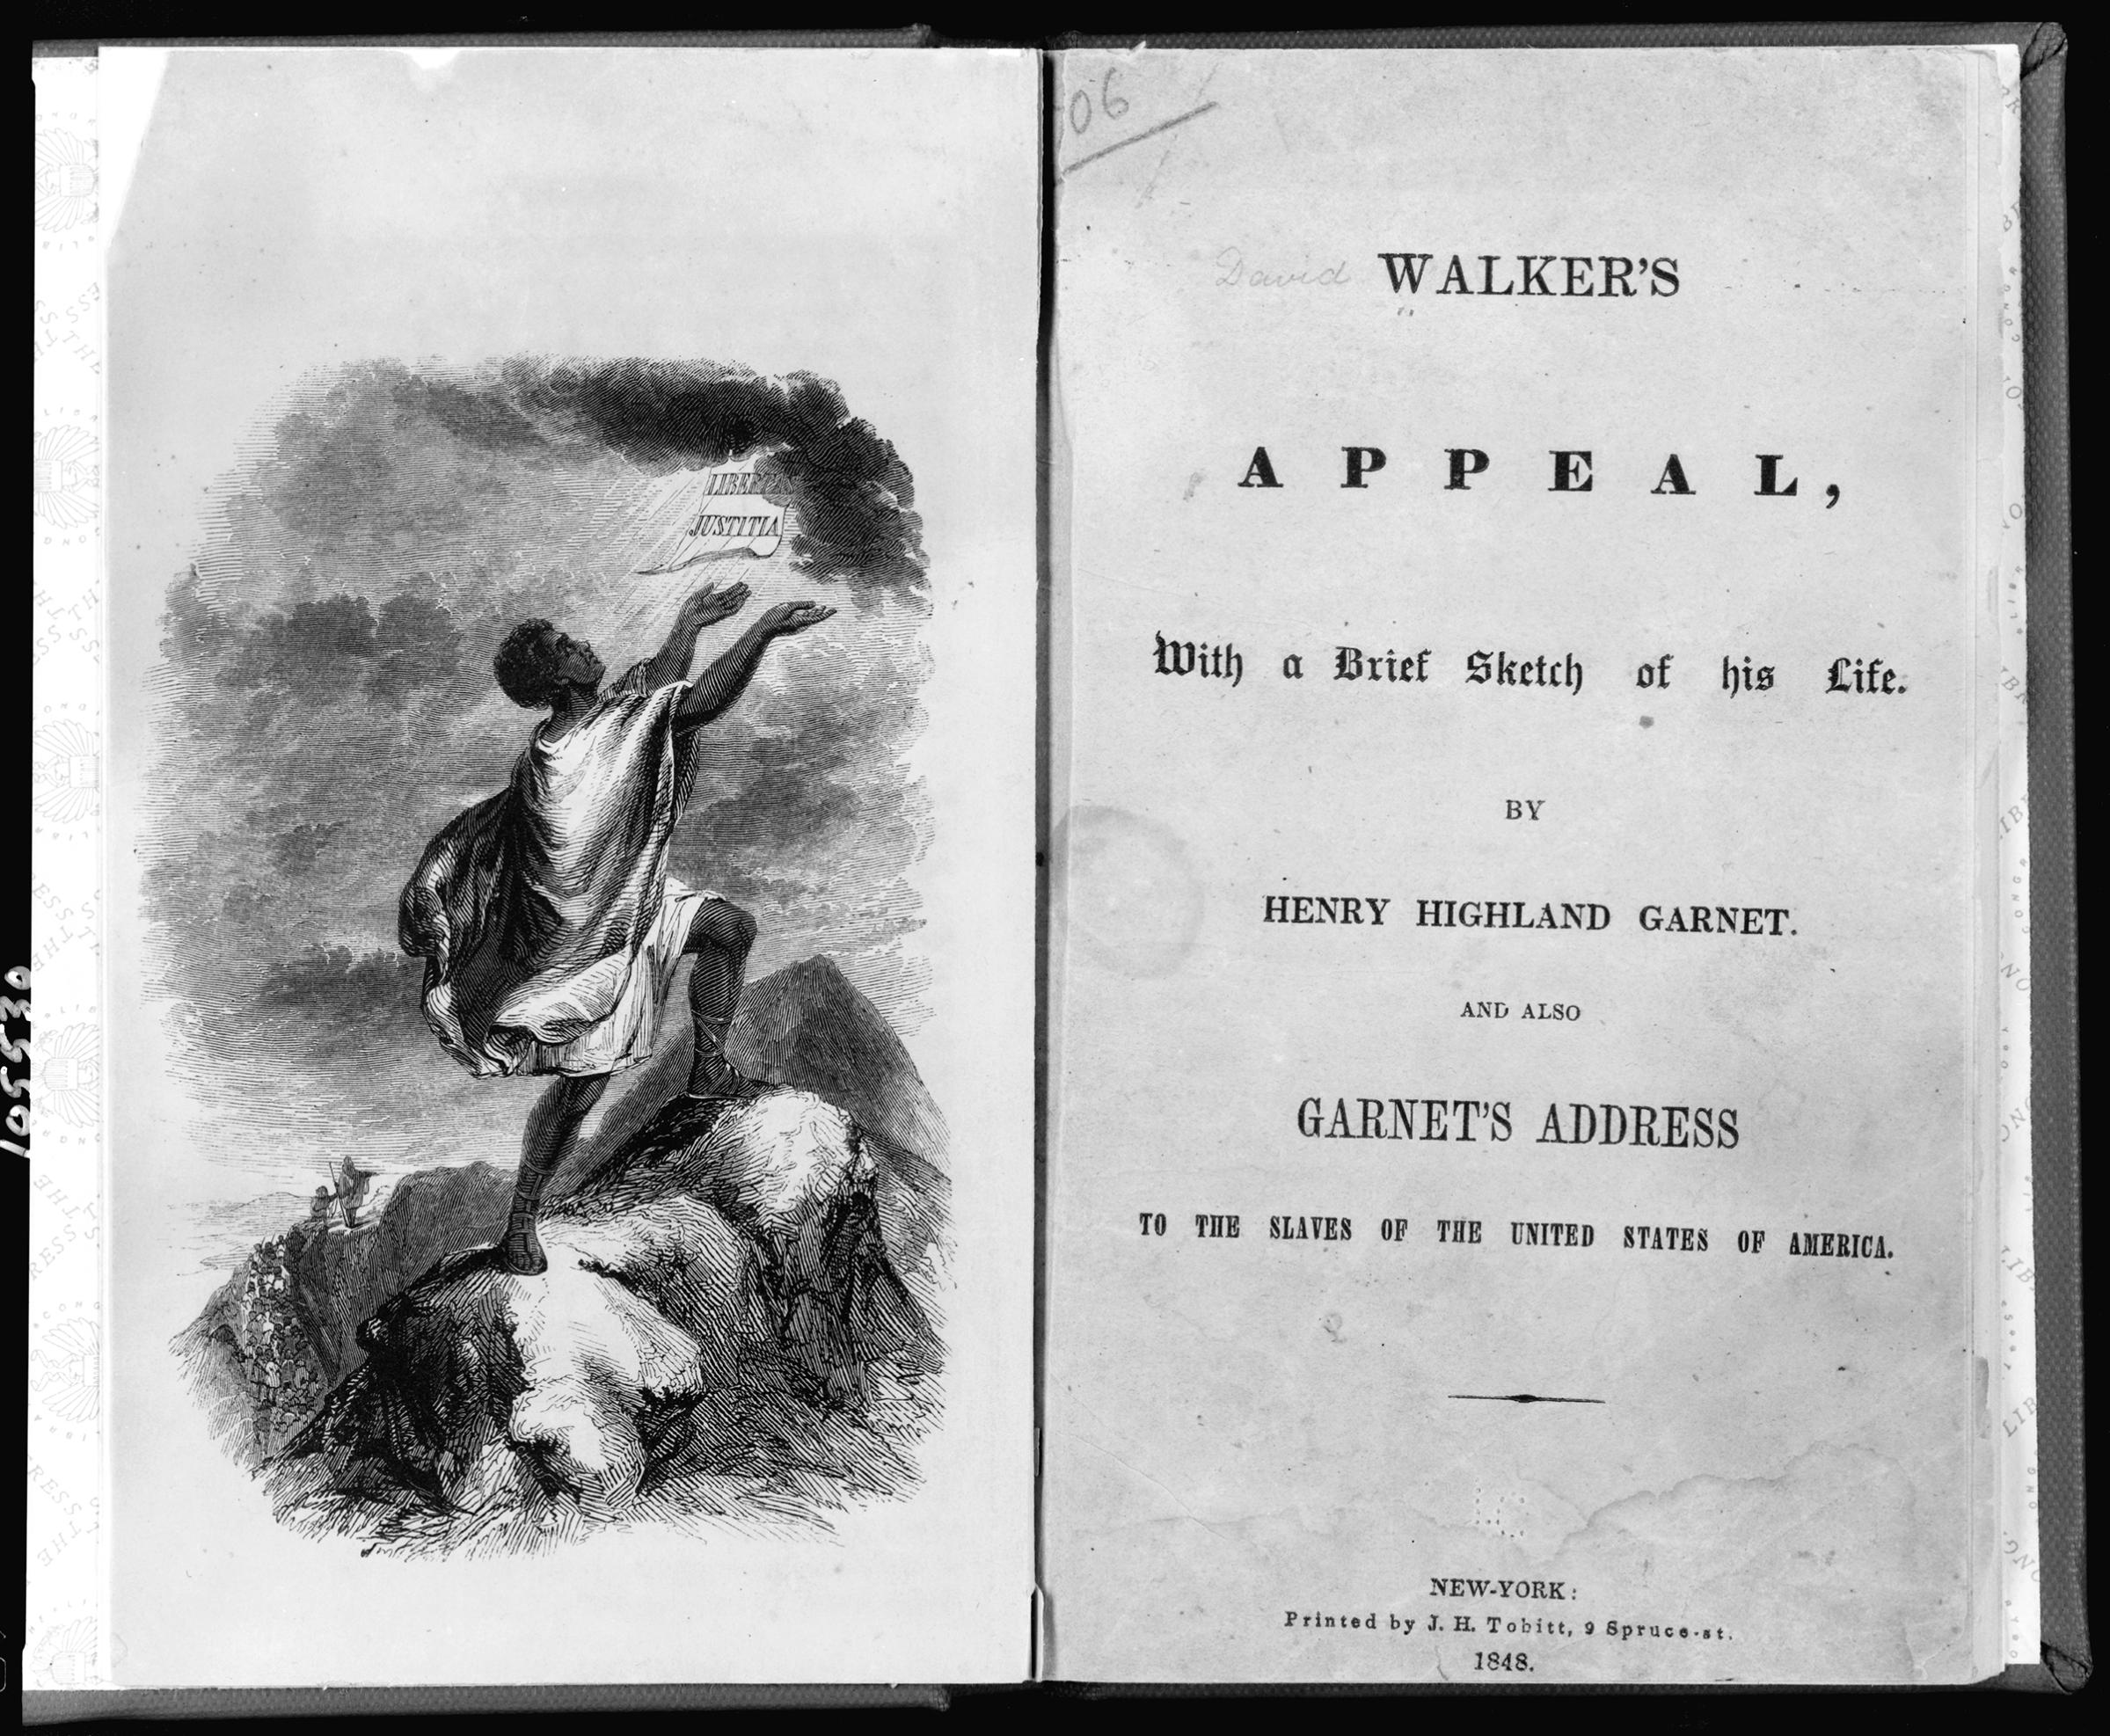 Title page showing slave on top of mountain from David Walkers Appeal.